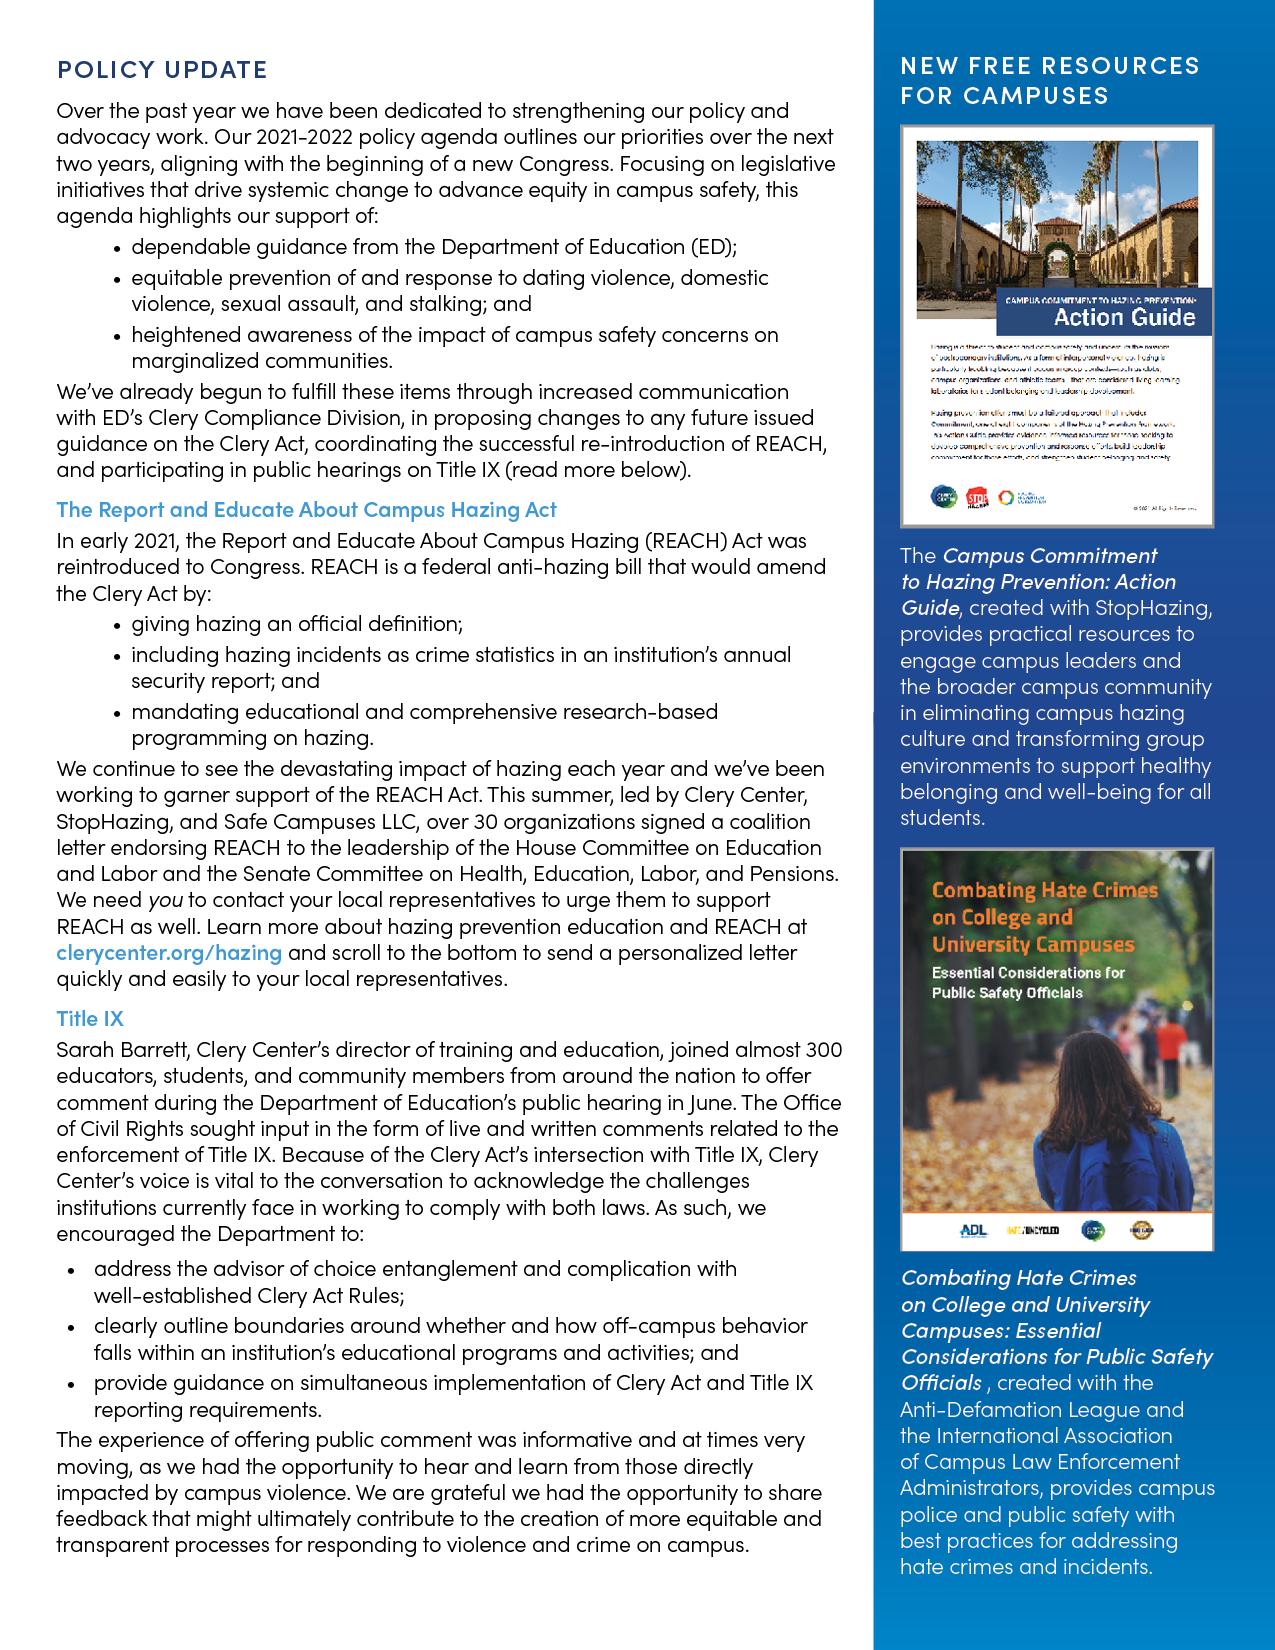 August Newsletter PDF - Page 2 Image. Please use the download link above to read the full PDF text.